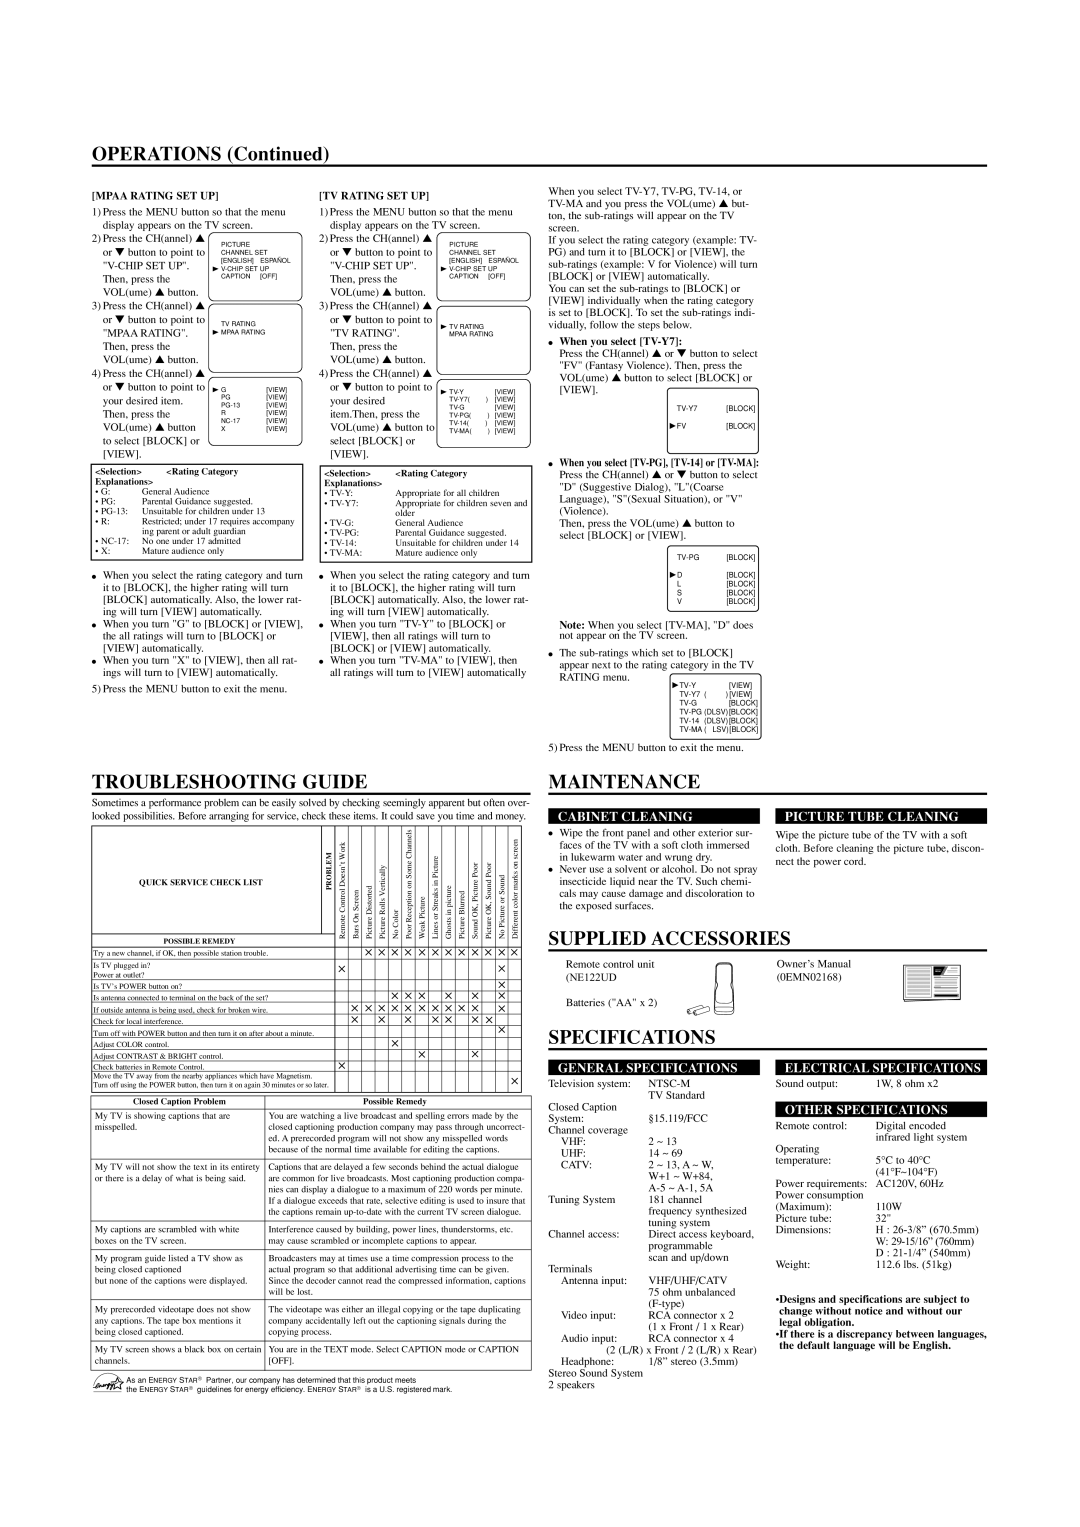 Sylvania 6432TD owner manual OPERATIONS Continued, Troubleshooting Guide, Maintenance, Supplied Accessories, Specifications 